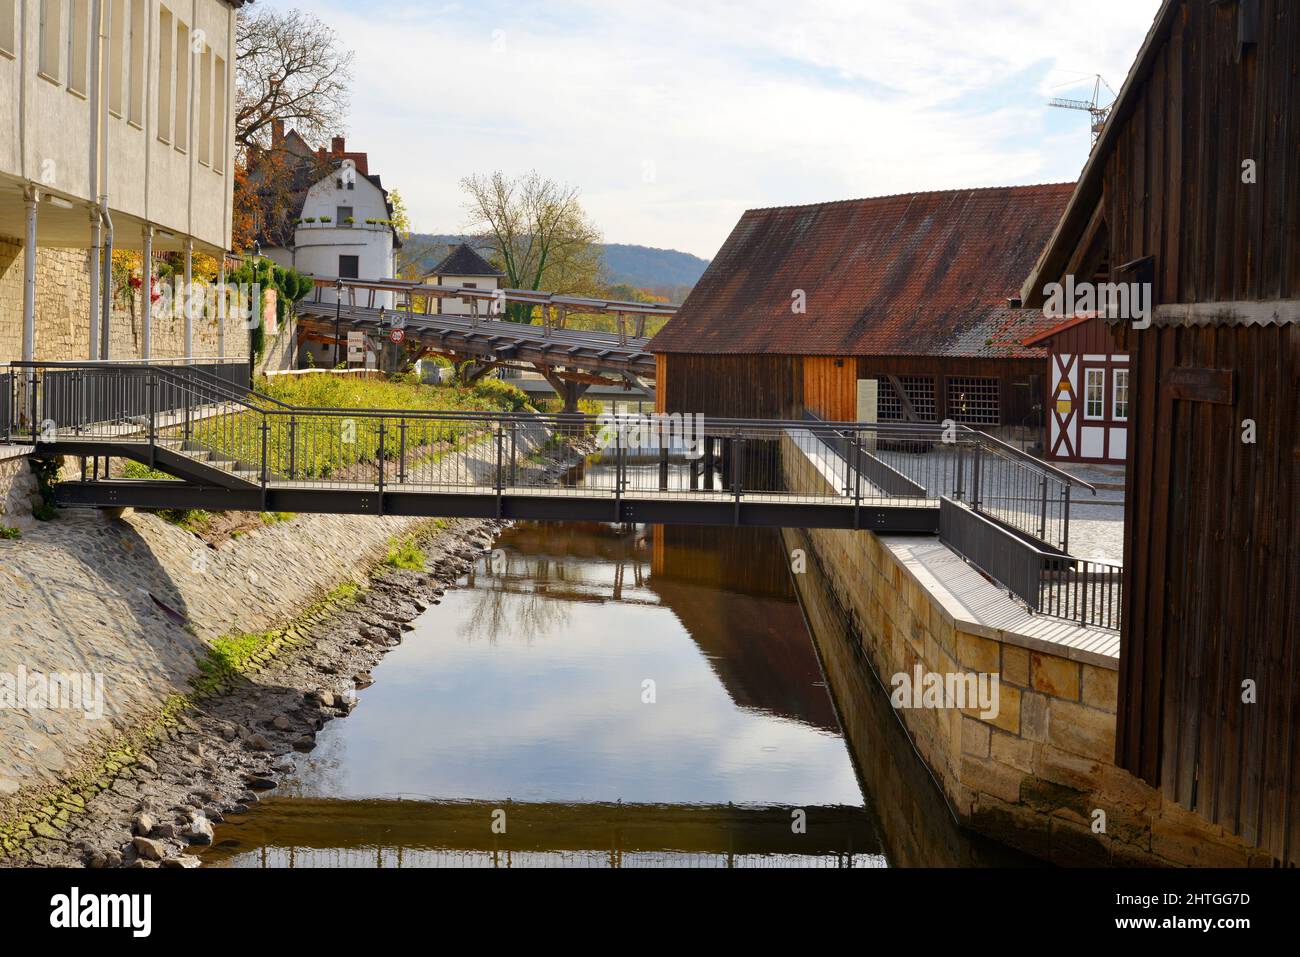 Bad Kosen, Germany mills and wooden structures of the nearby Graduation Tower spa complex Stock Photo